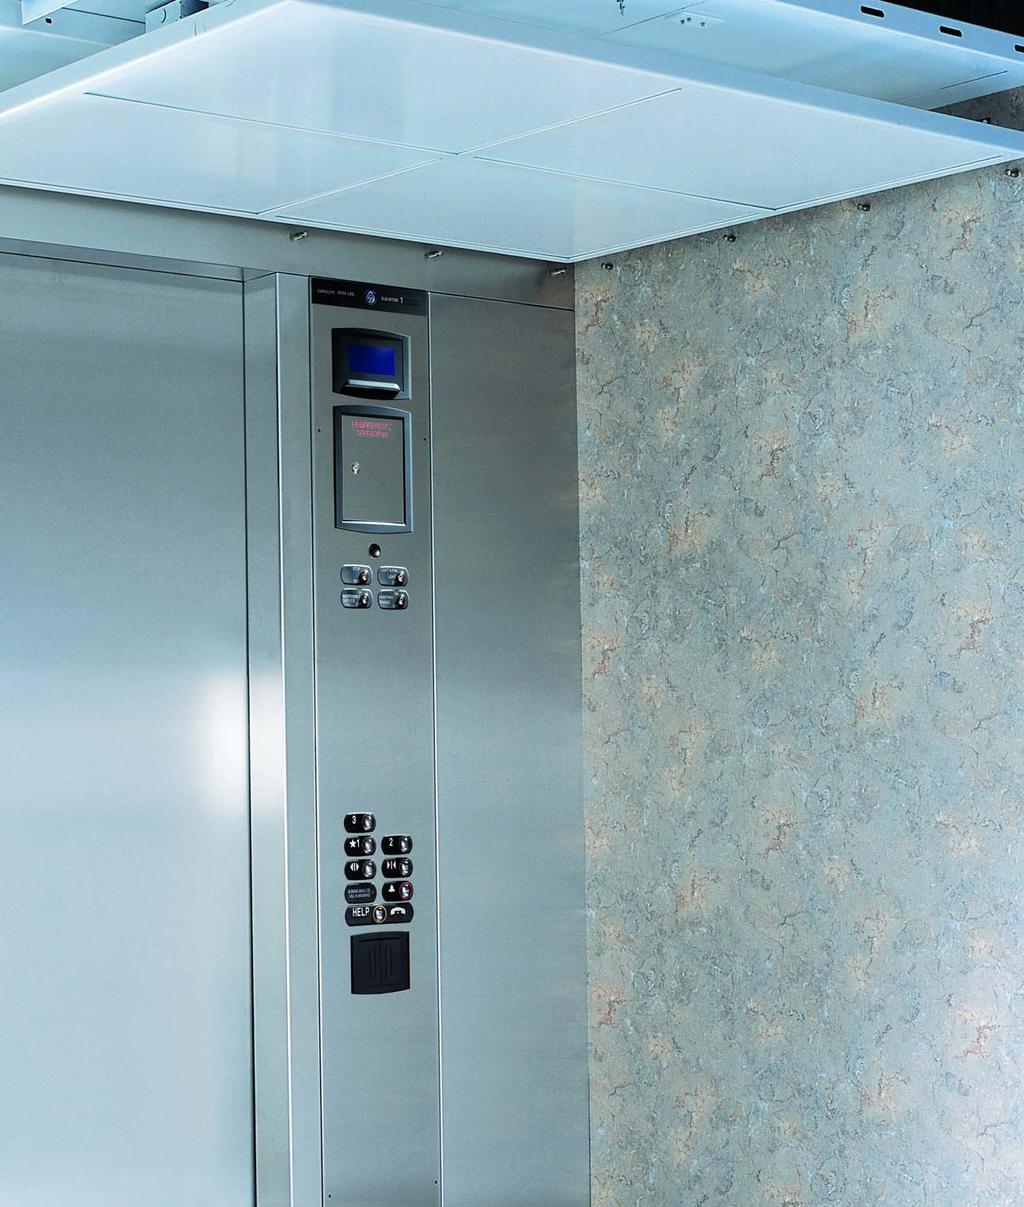 Standard Design Laminated Plastic Cab ThyssenKrupp Elevator's laminated plastic cabs are a beautiful blend of style and functionality.